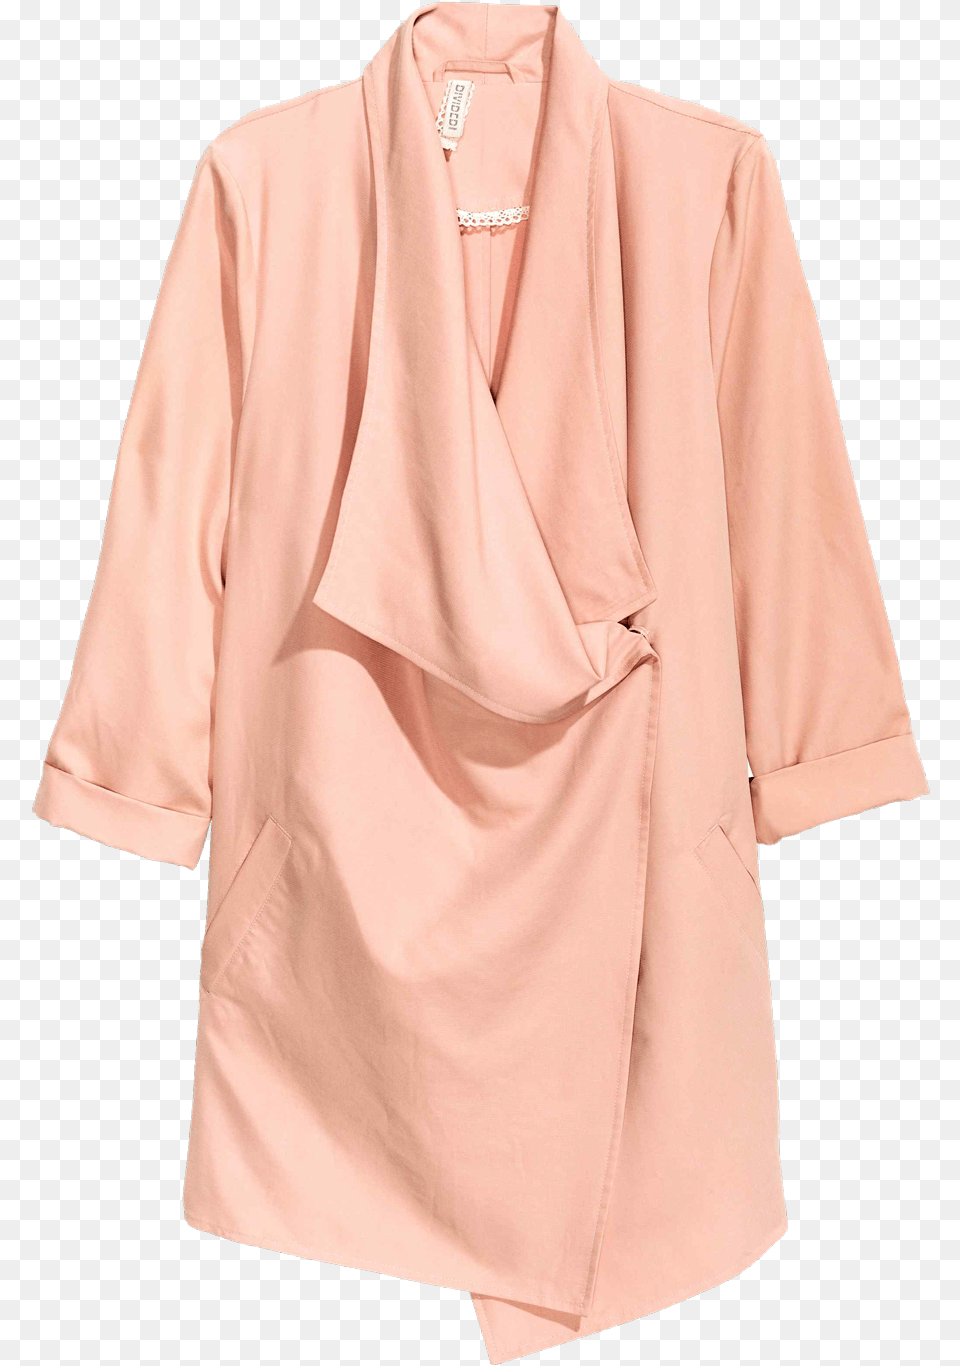 Blouse Download Clothes Hanger, Clothing, Dress, Fashion, Robe Png